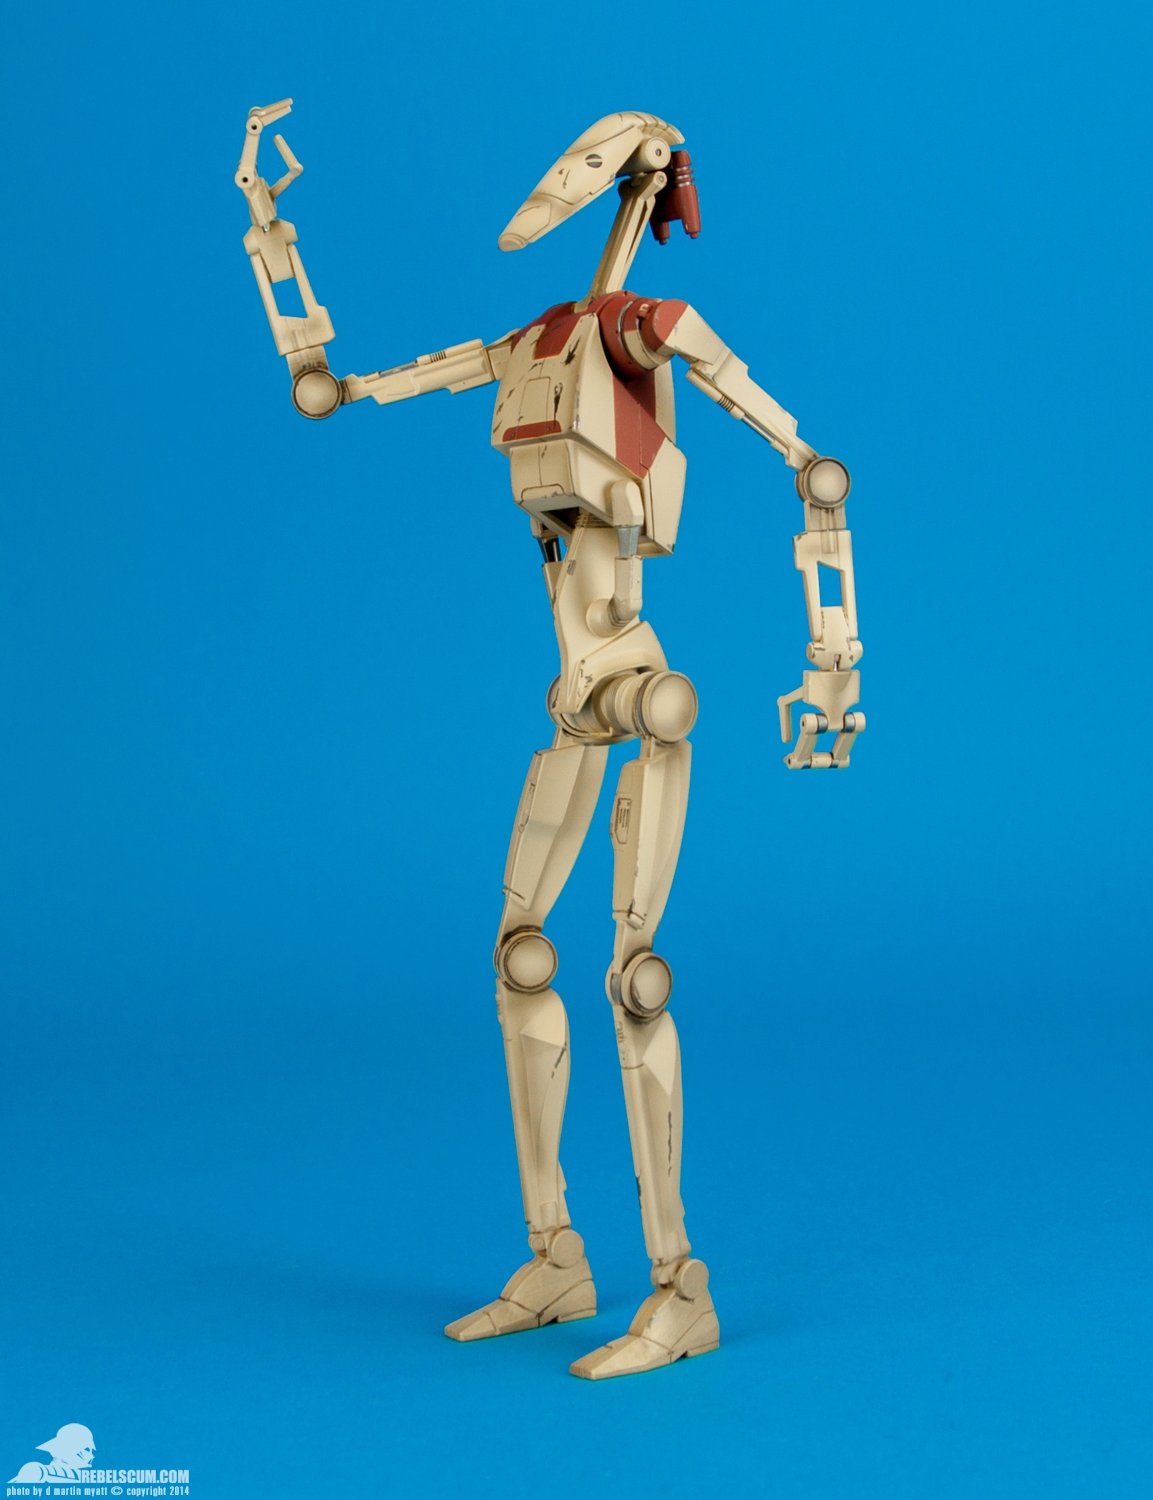 Security-Droids-Sixth-Scale-Sideshow-Collectibles-003.jpg